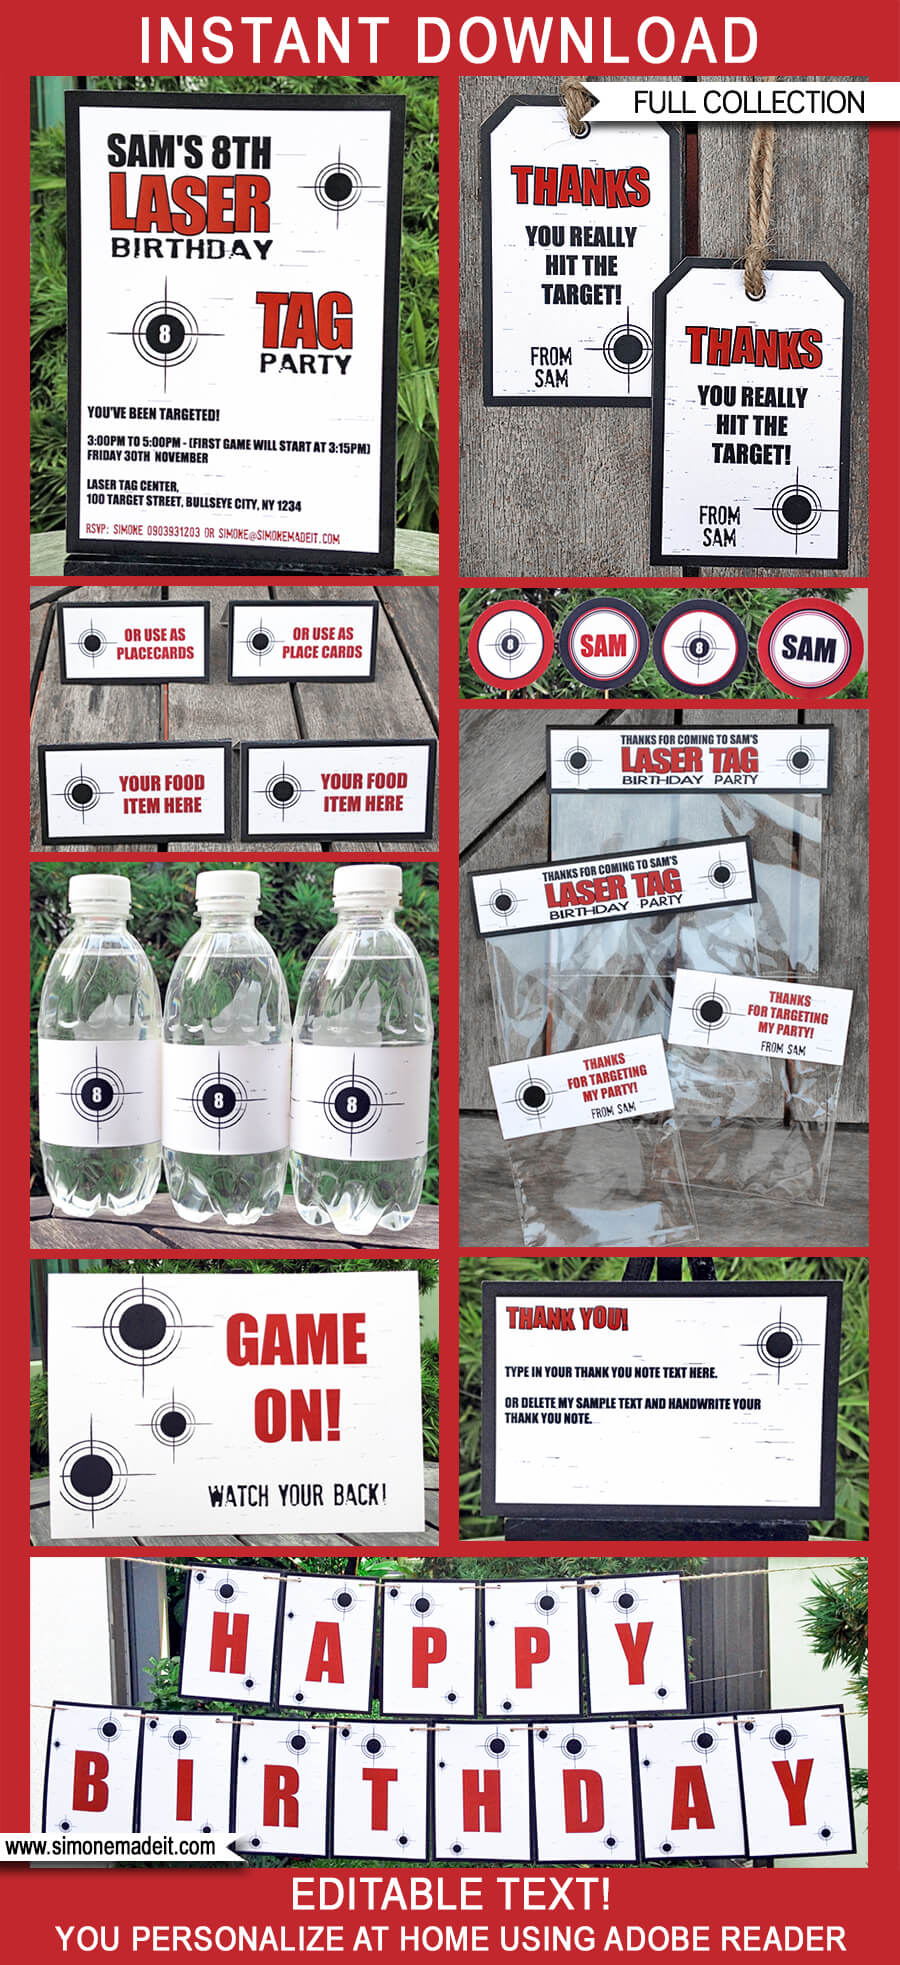 Laser Tag Party Printables, Invitations & Decorations | Editable Birthday Party Theme Templates | INSTANT DOWNLOAD $12.50 via SIMONEmadeit.com